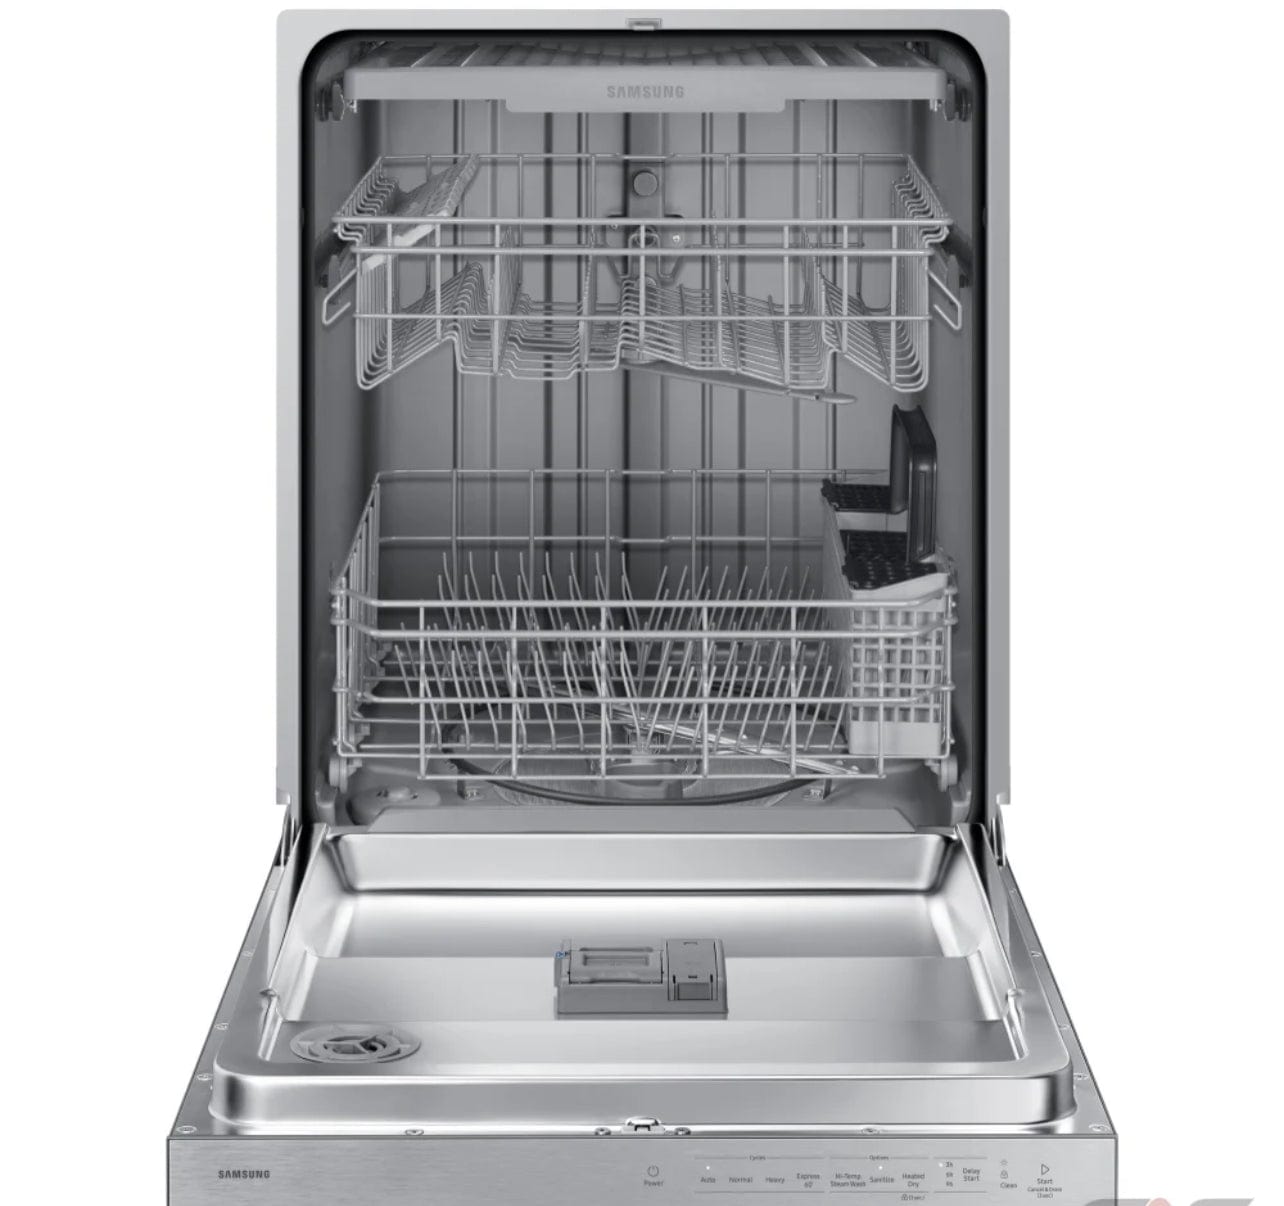 Samsung DW80CG4051SRAA Dishwasher, 24" Exterior Width, 51 dB Decibel Level, Fully Integrated, 4 Wash Cycles, 15 Capacity (Place Settings), 3 Loading Racks, Stainless Steel colour